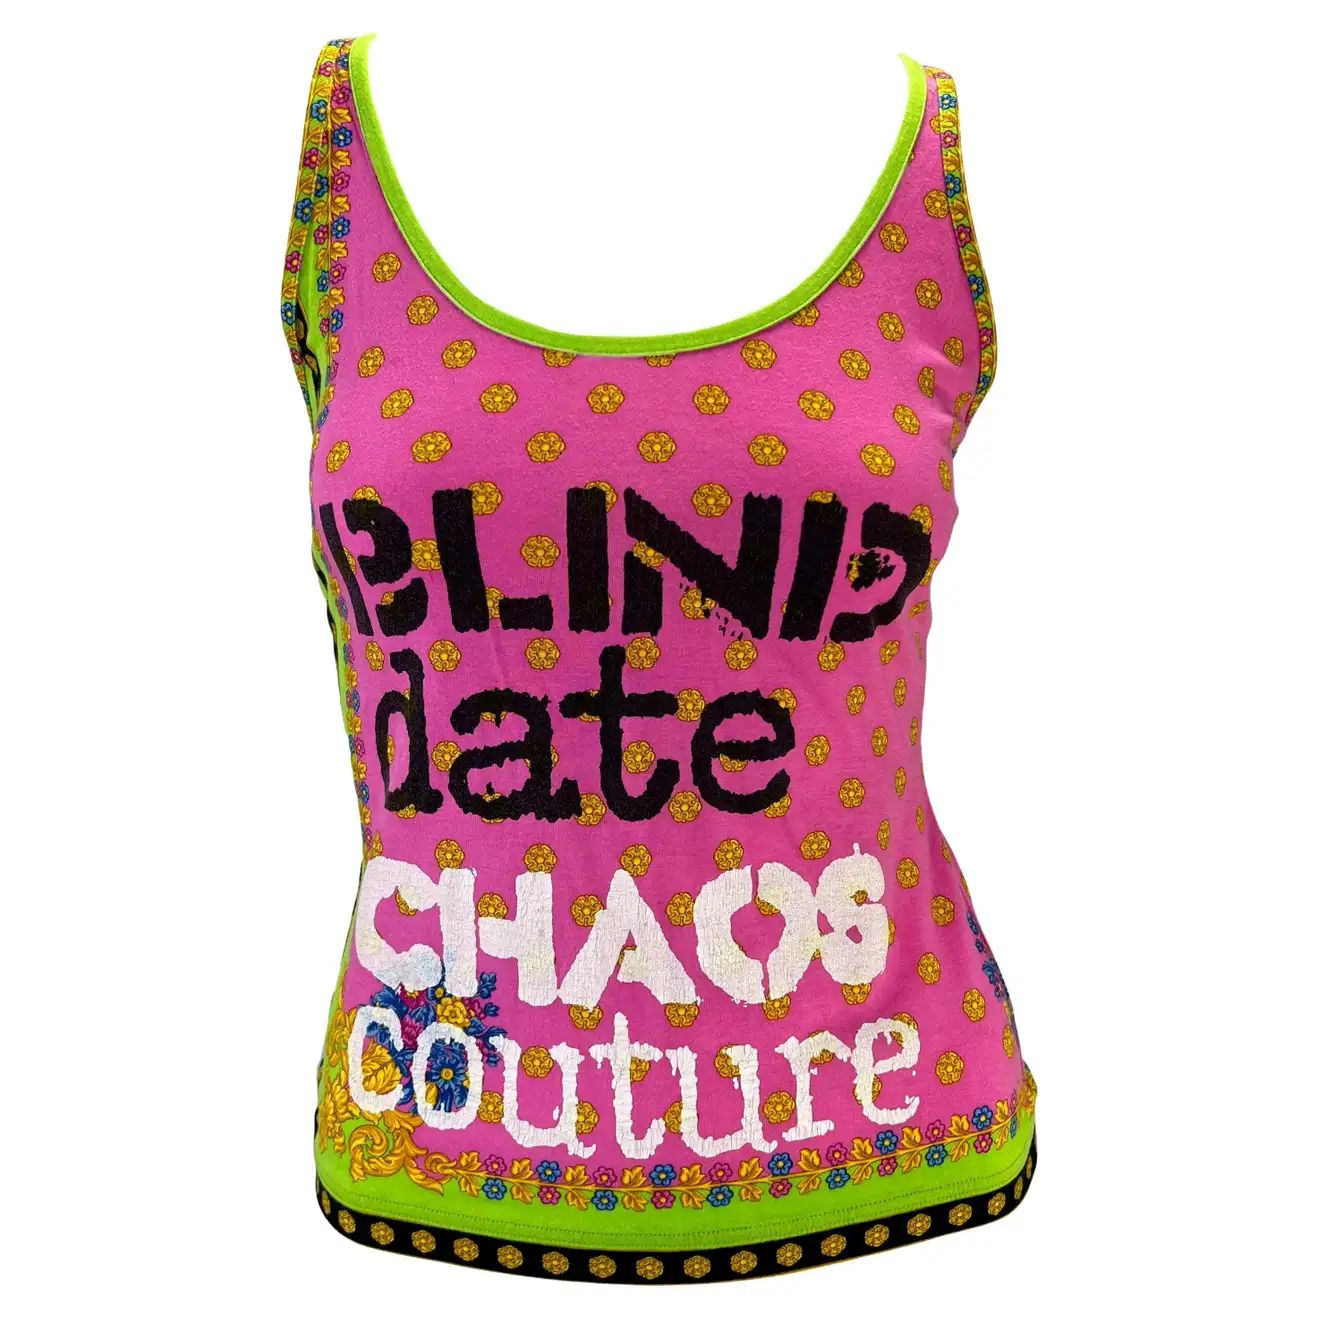 S/S 2005 Versace by Donatella Chaos Couture Print Pink Stretch Racer Tank Top | 1stDibs